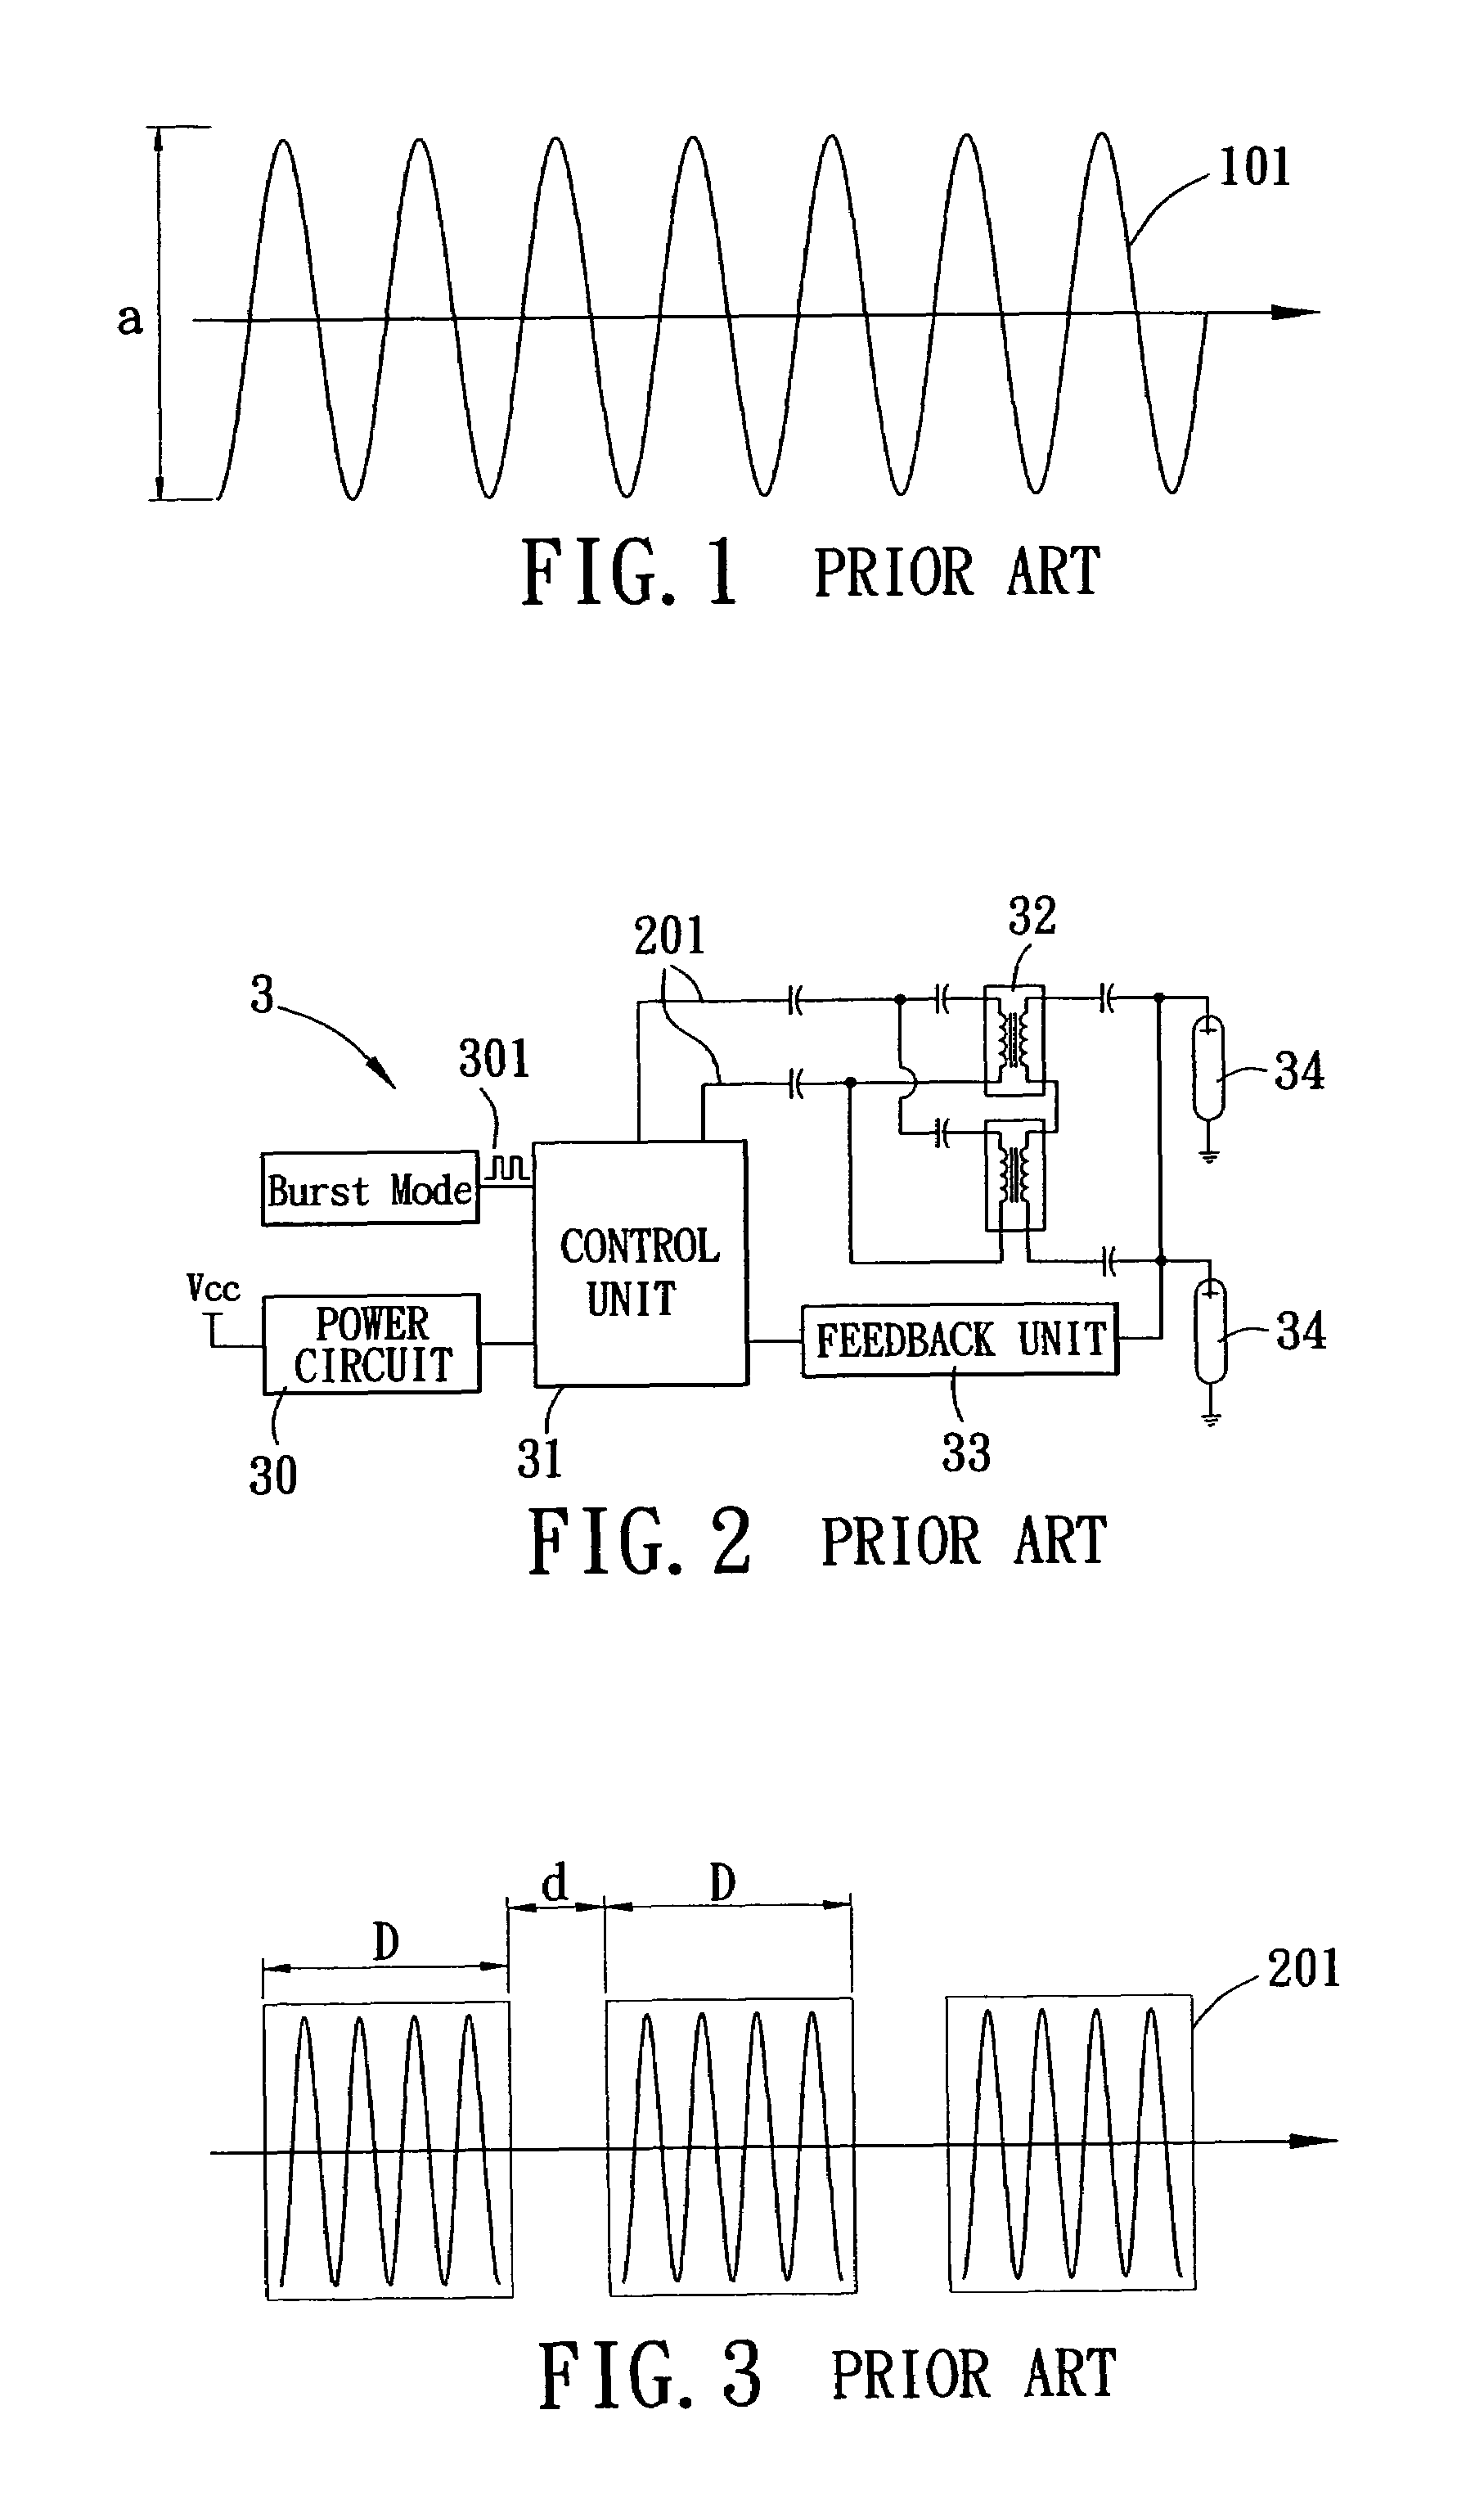 Television and back lighting source module capable of preventing harmonic interference